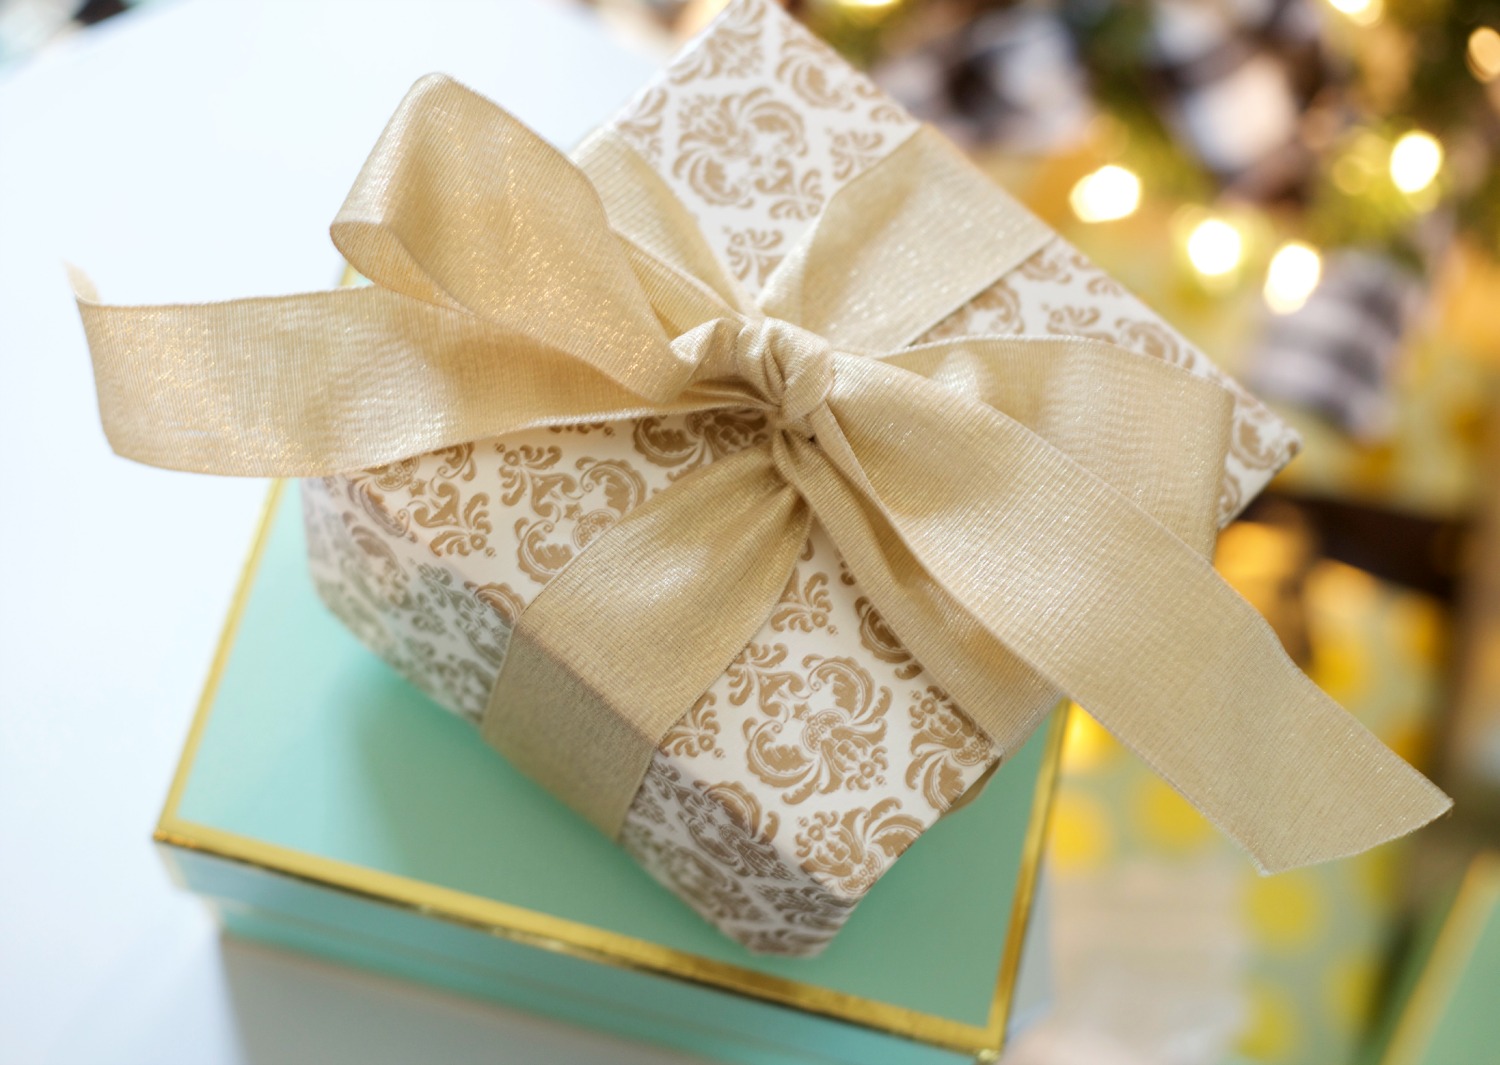 DIY Gift Box by PartiesforPennies.com | Gift Wrap, Homemade Gift, Christmas, Present, Paper Craft